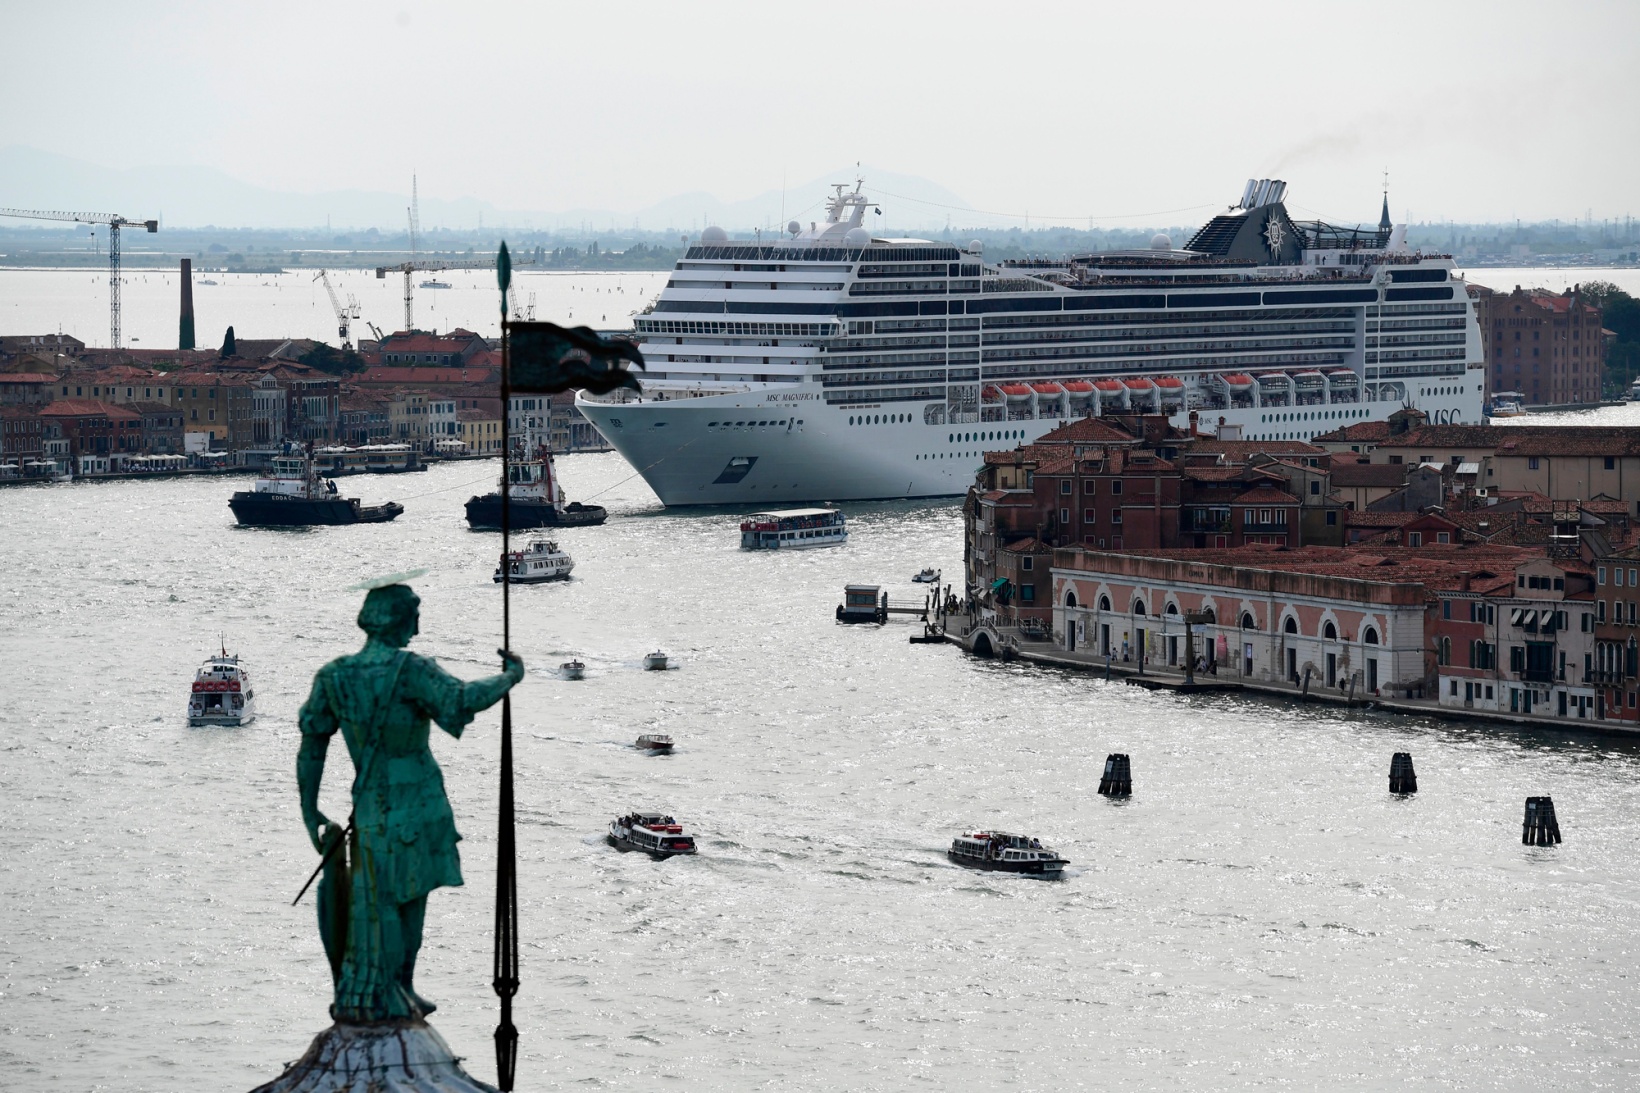 Venice Cruise Ship Ban Italy Approves Measure to Protect Historic